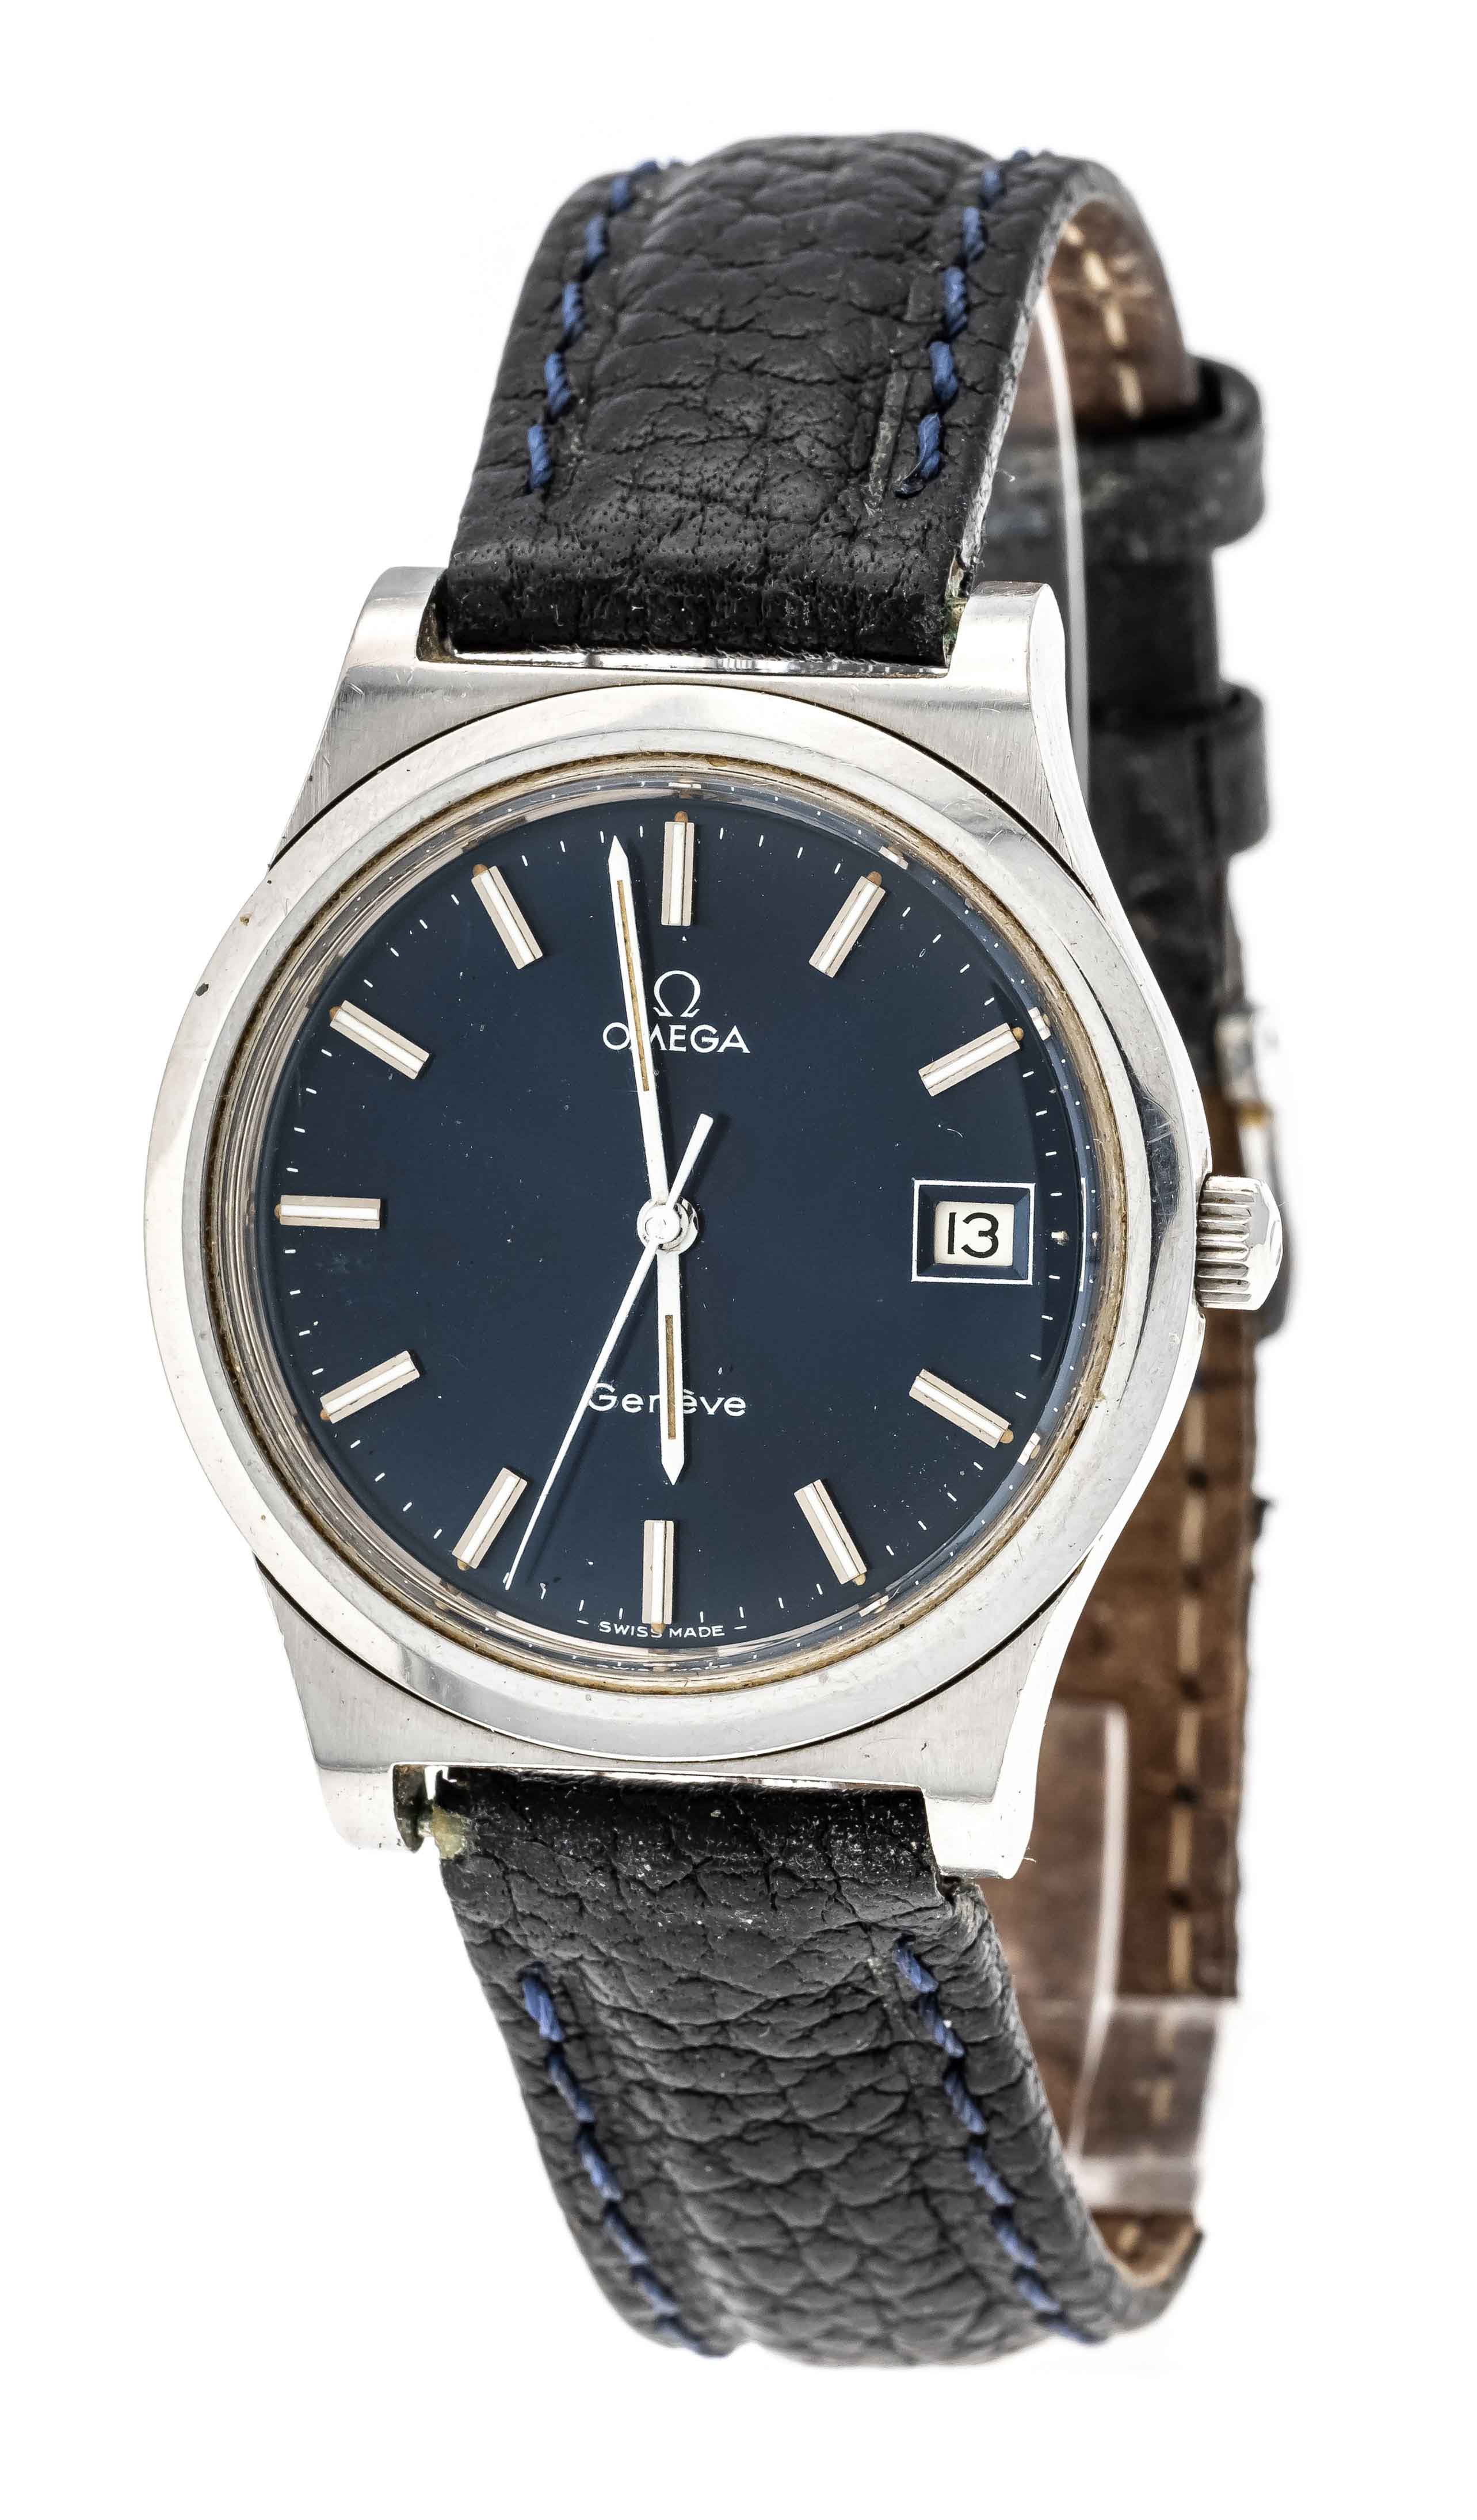 Omega men's watch manual winding, Ref. 136.0102, steel case, movement Cal. 1030 runs exactly, blue - Image 3 of 9